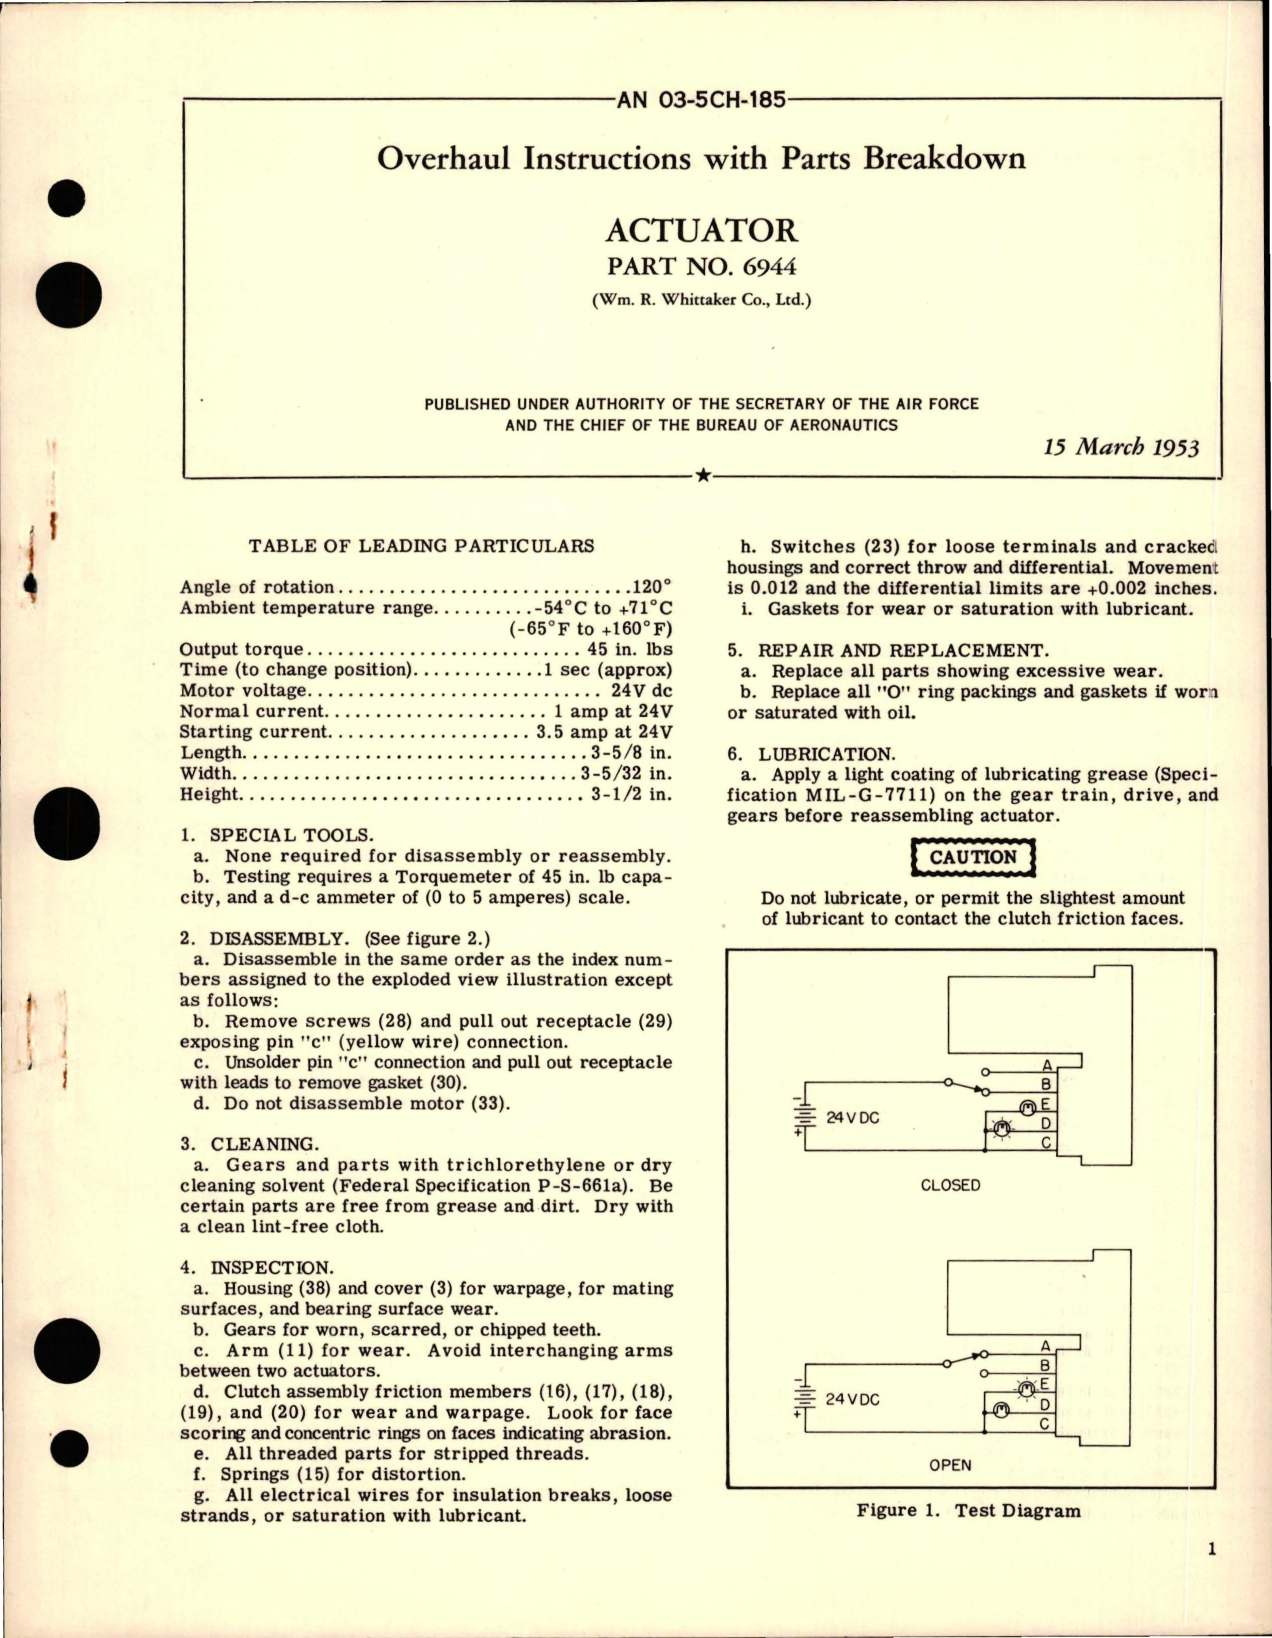 Sample page 1 from AirCorps Library document: Overhaul Instructions with Parts Breakdown for Actuator - Part 6944